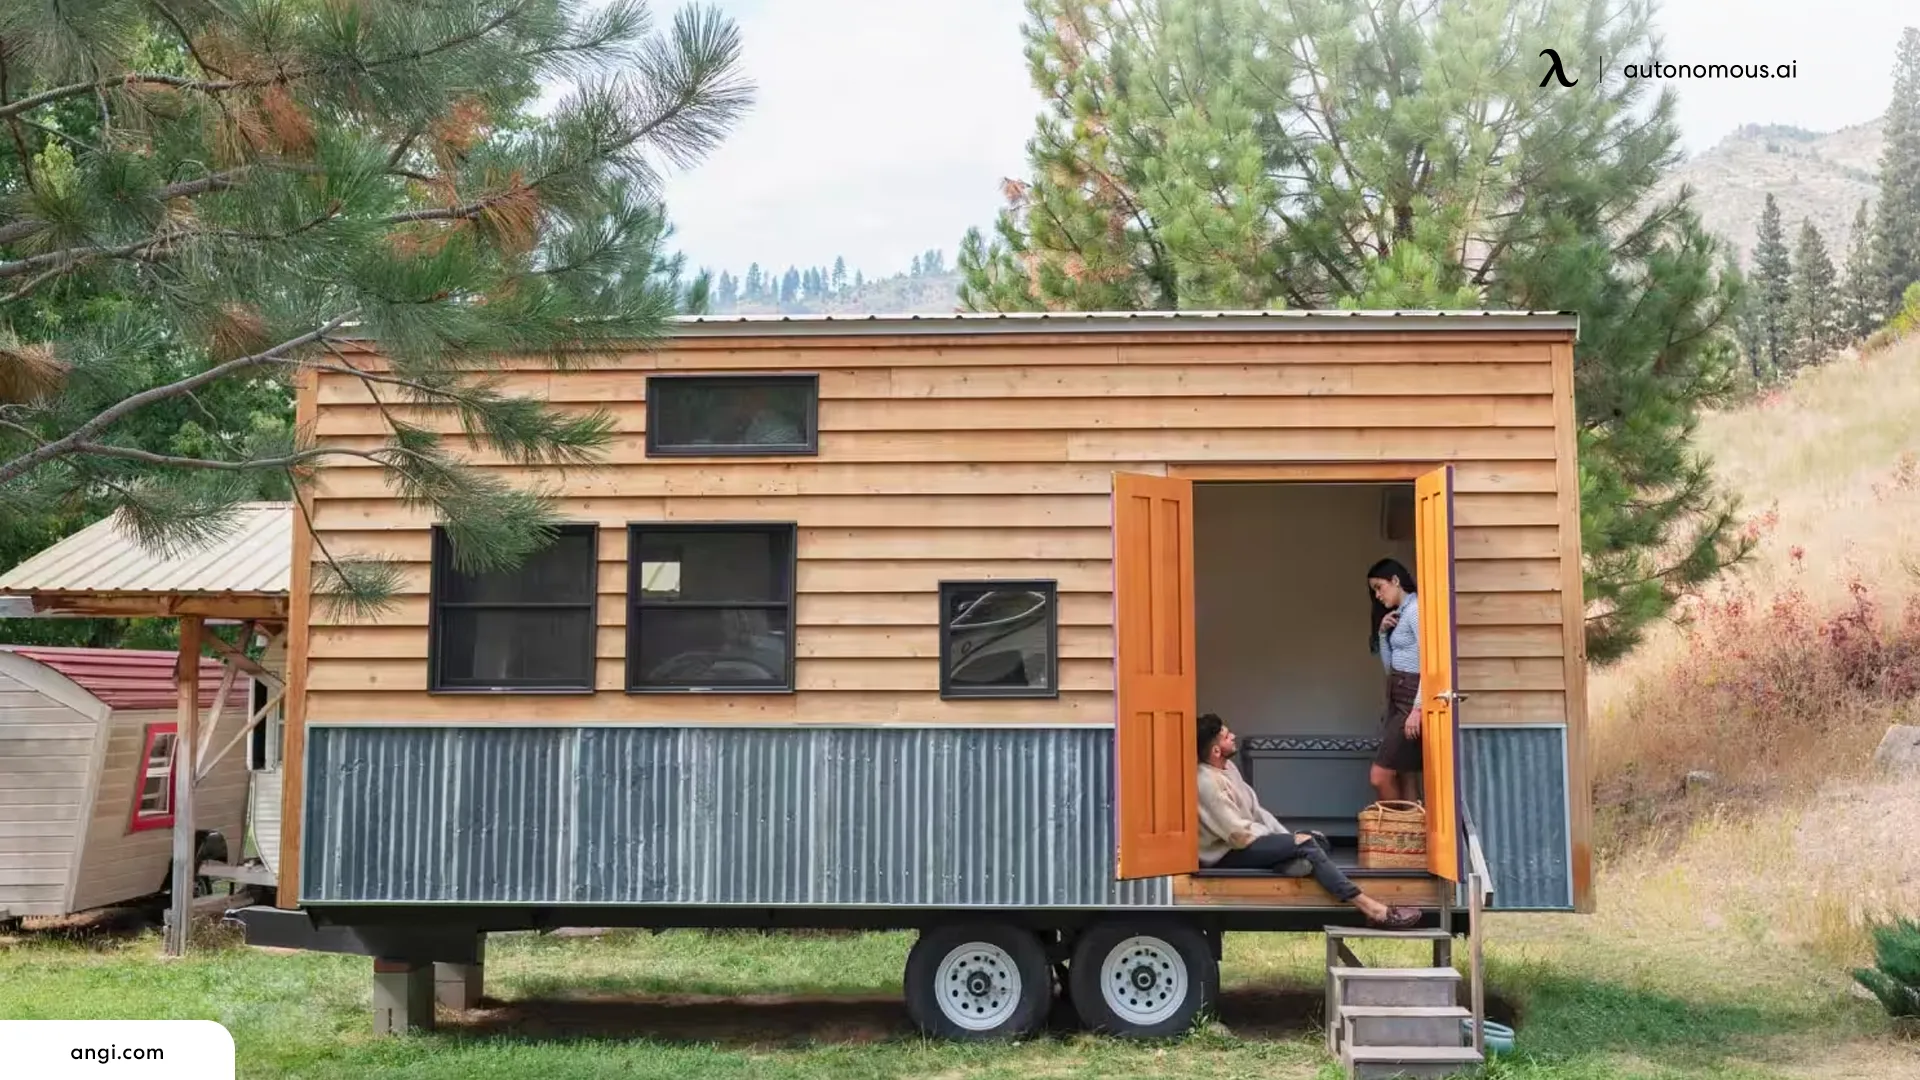 Building or Purchasing a Tiny Home?